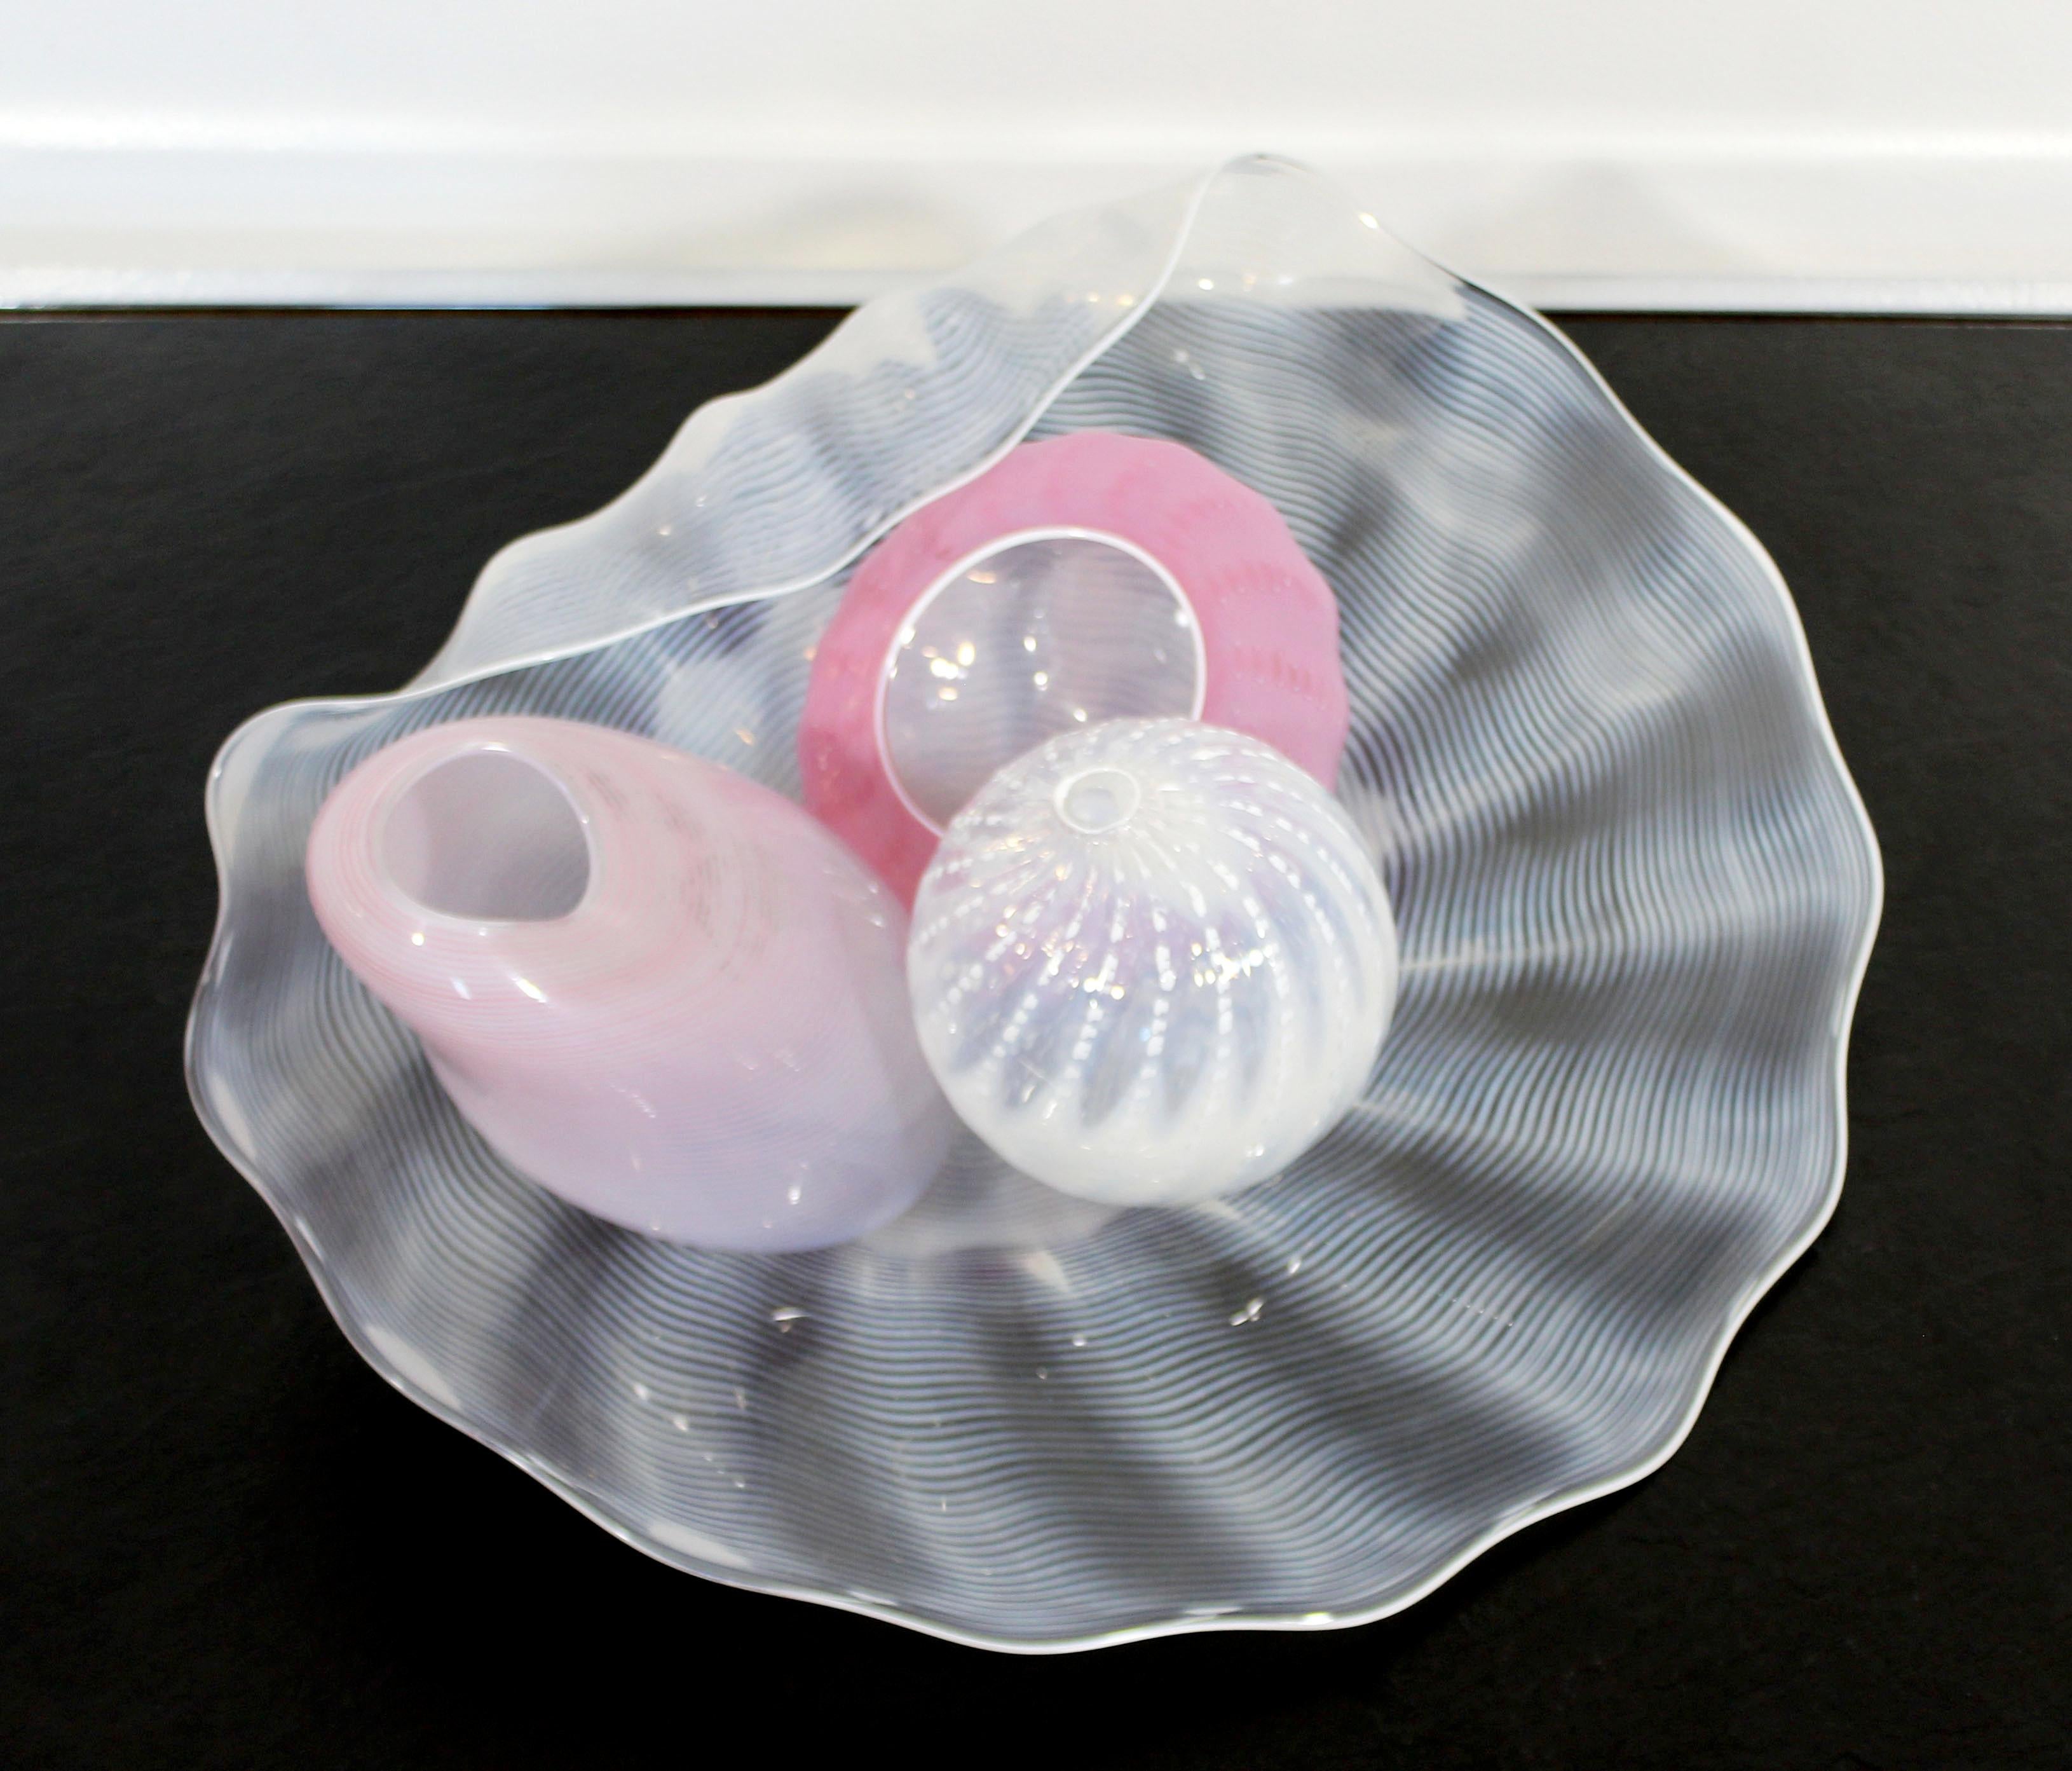 American Contemporary Dale Chihuly 4-Piece Glass Sea Shell Art Table Sculpture 1990s Pink